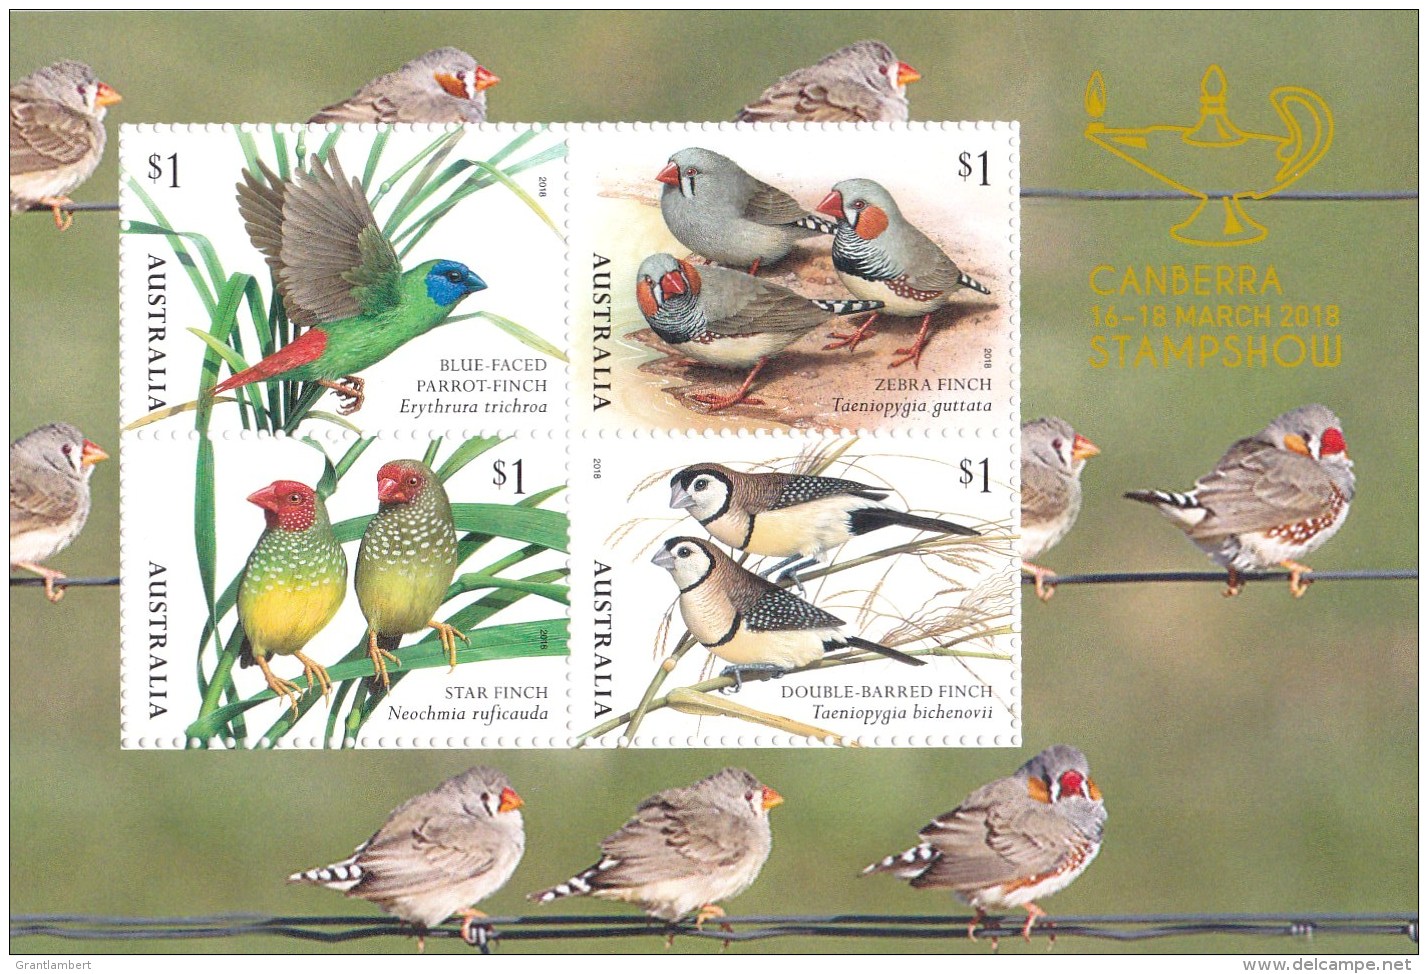 Australia 2018 Canberra Stampshow Finches Minisheet MNH - Neufs